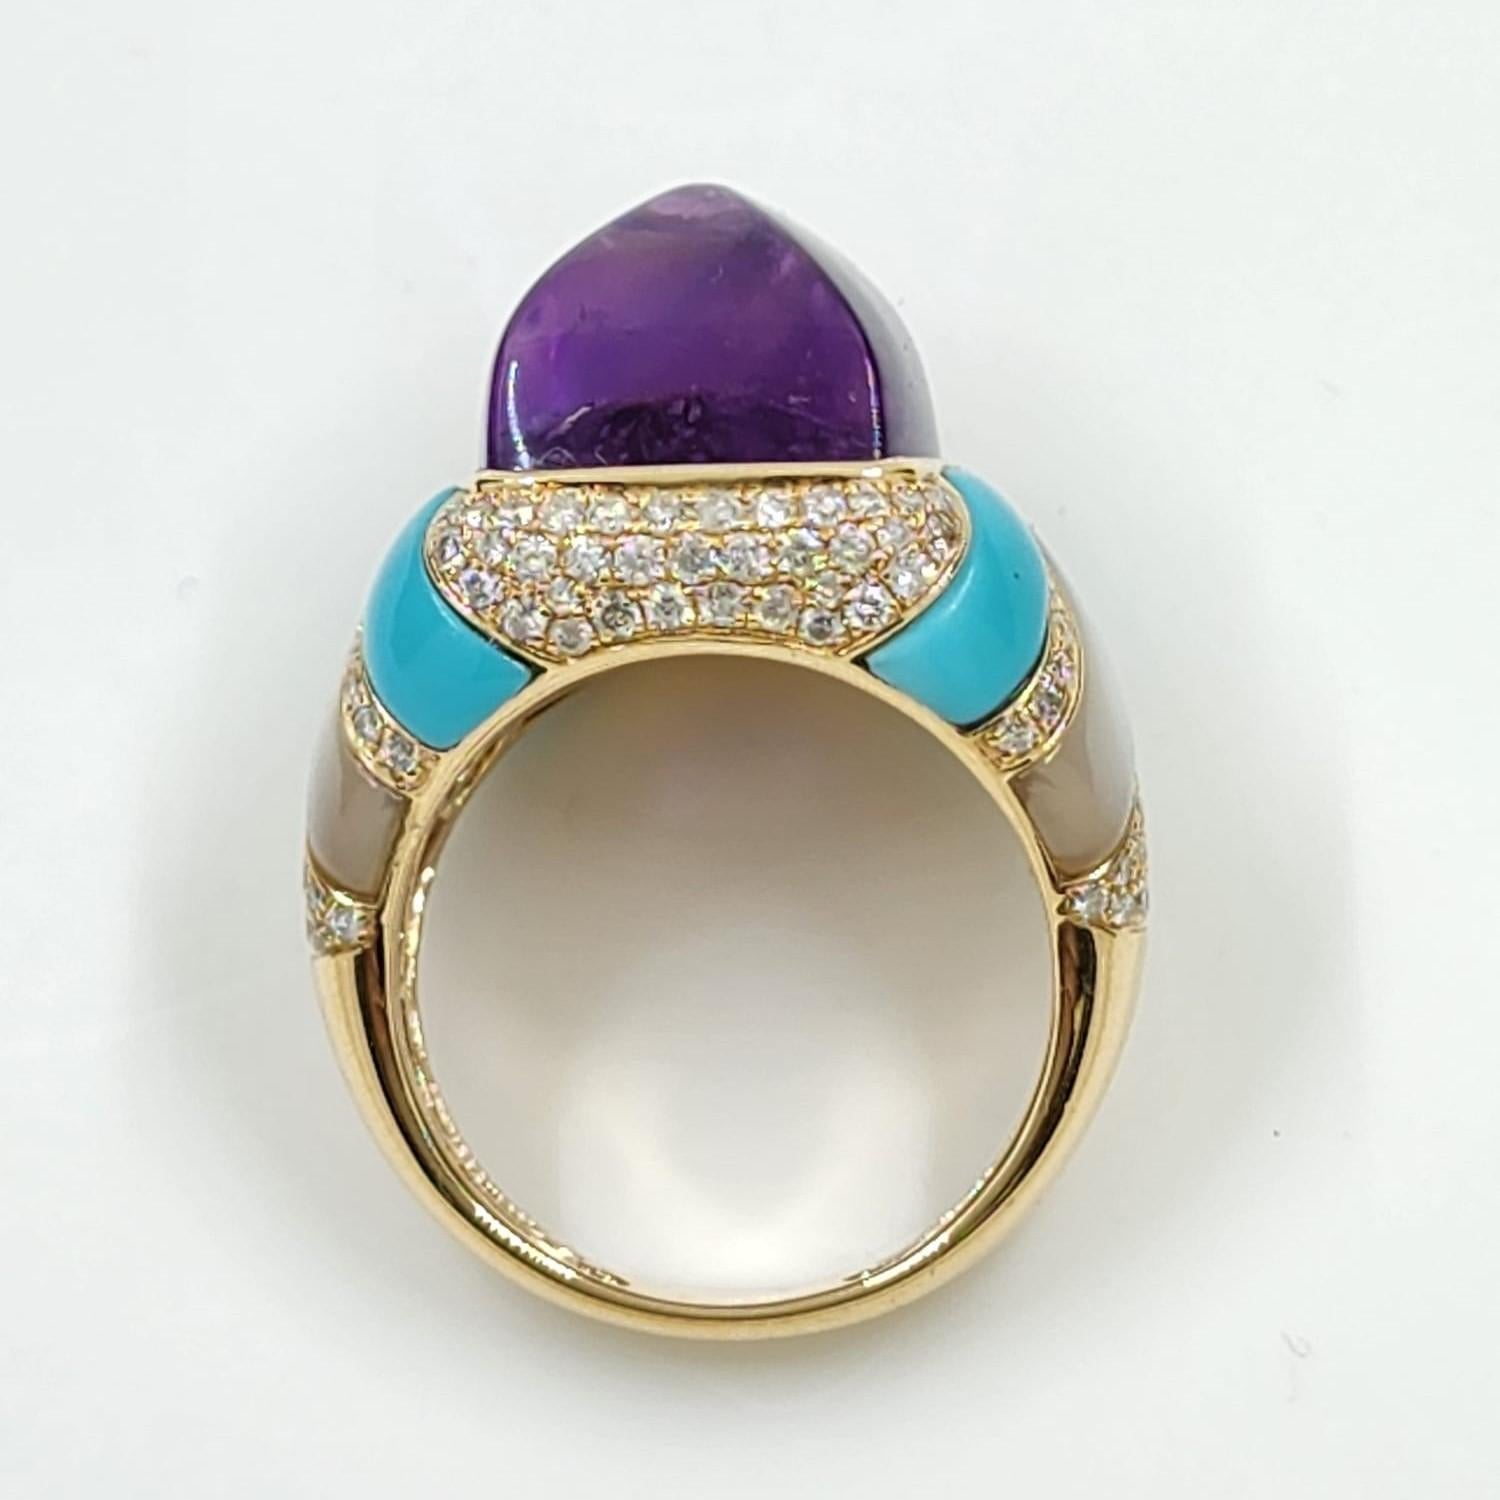 Contemporary 15.36 Carat Amethyst Diamond Turquoise Cocktail Ring in 14 Karat Yellow Gold